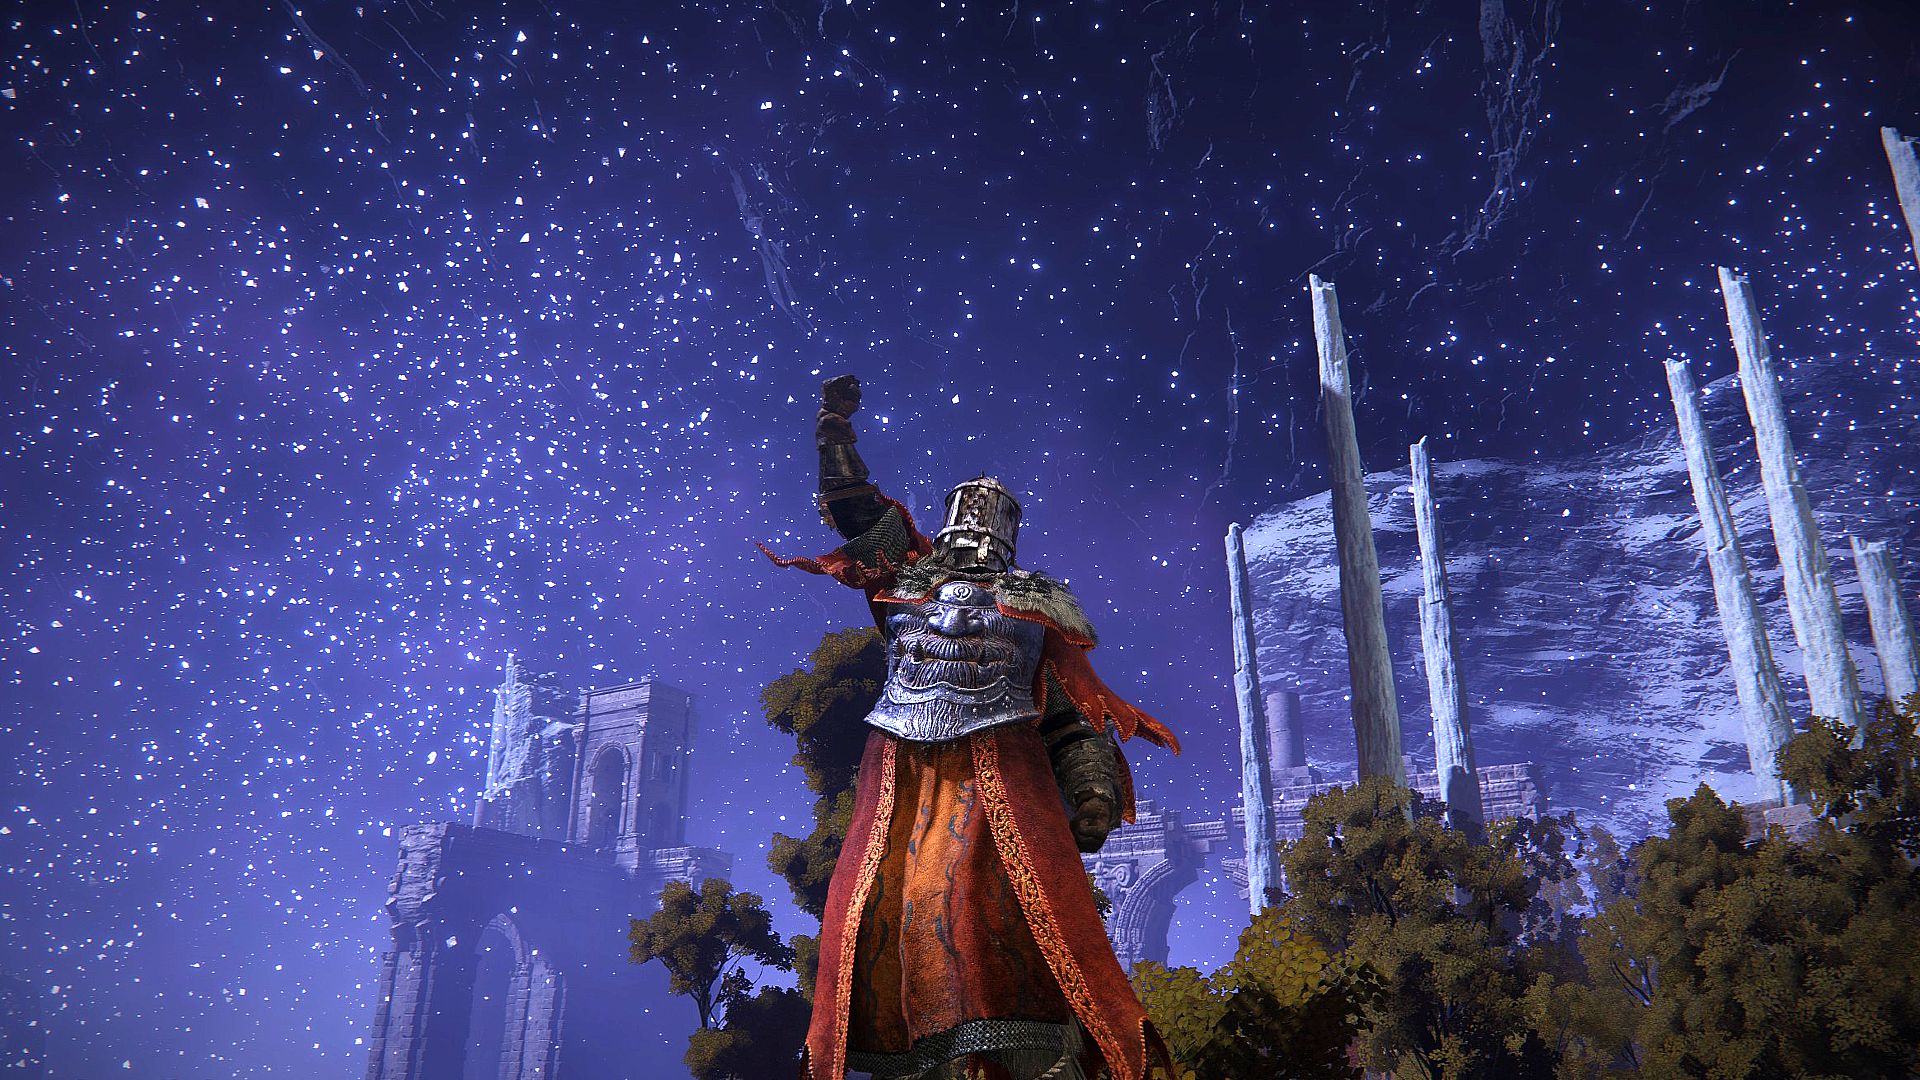 Elden Ring dying twice: a heavily armoured player performing an emote in which they punch the air, there's a starry night backdrop behind them